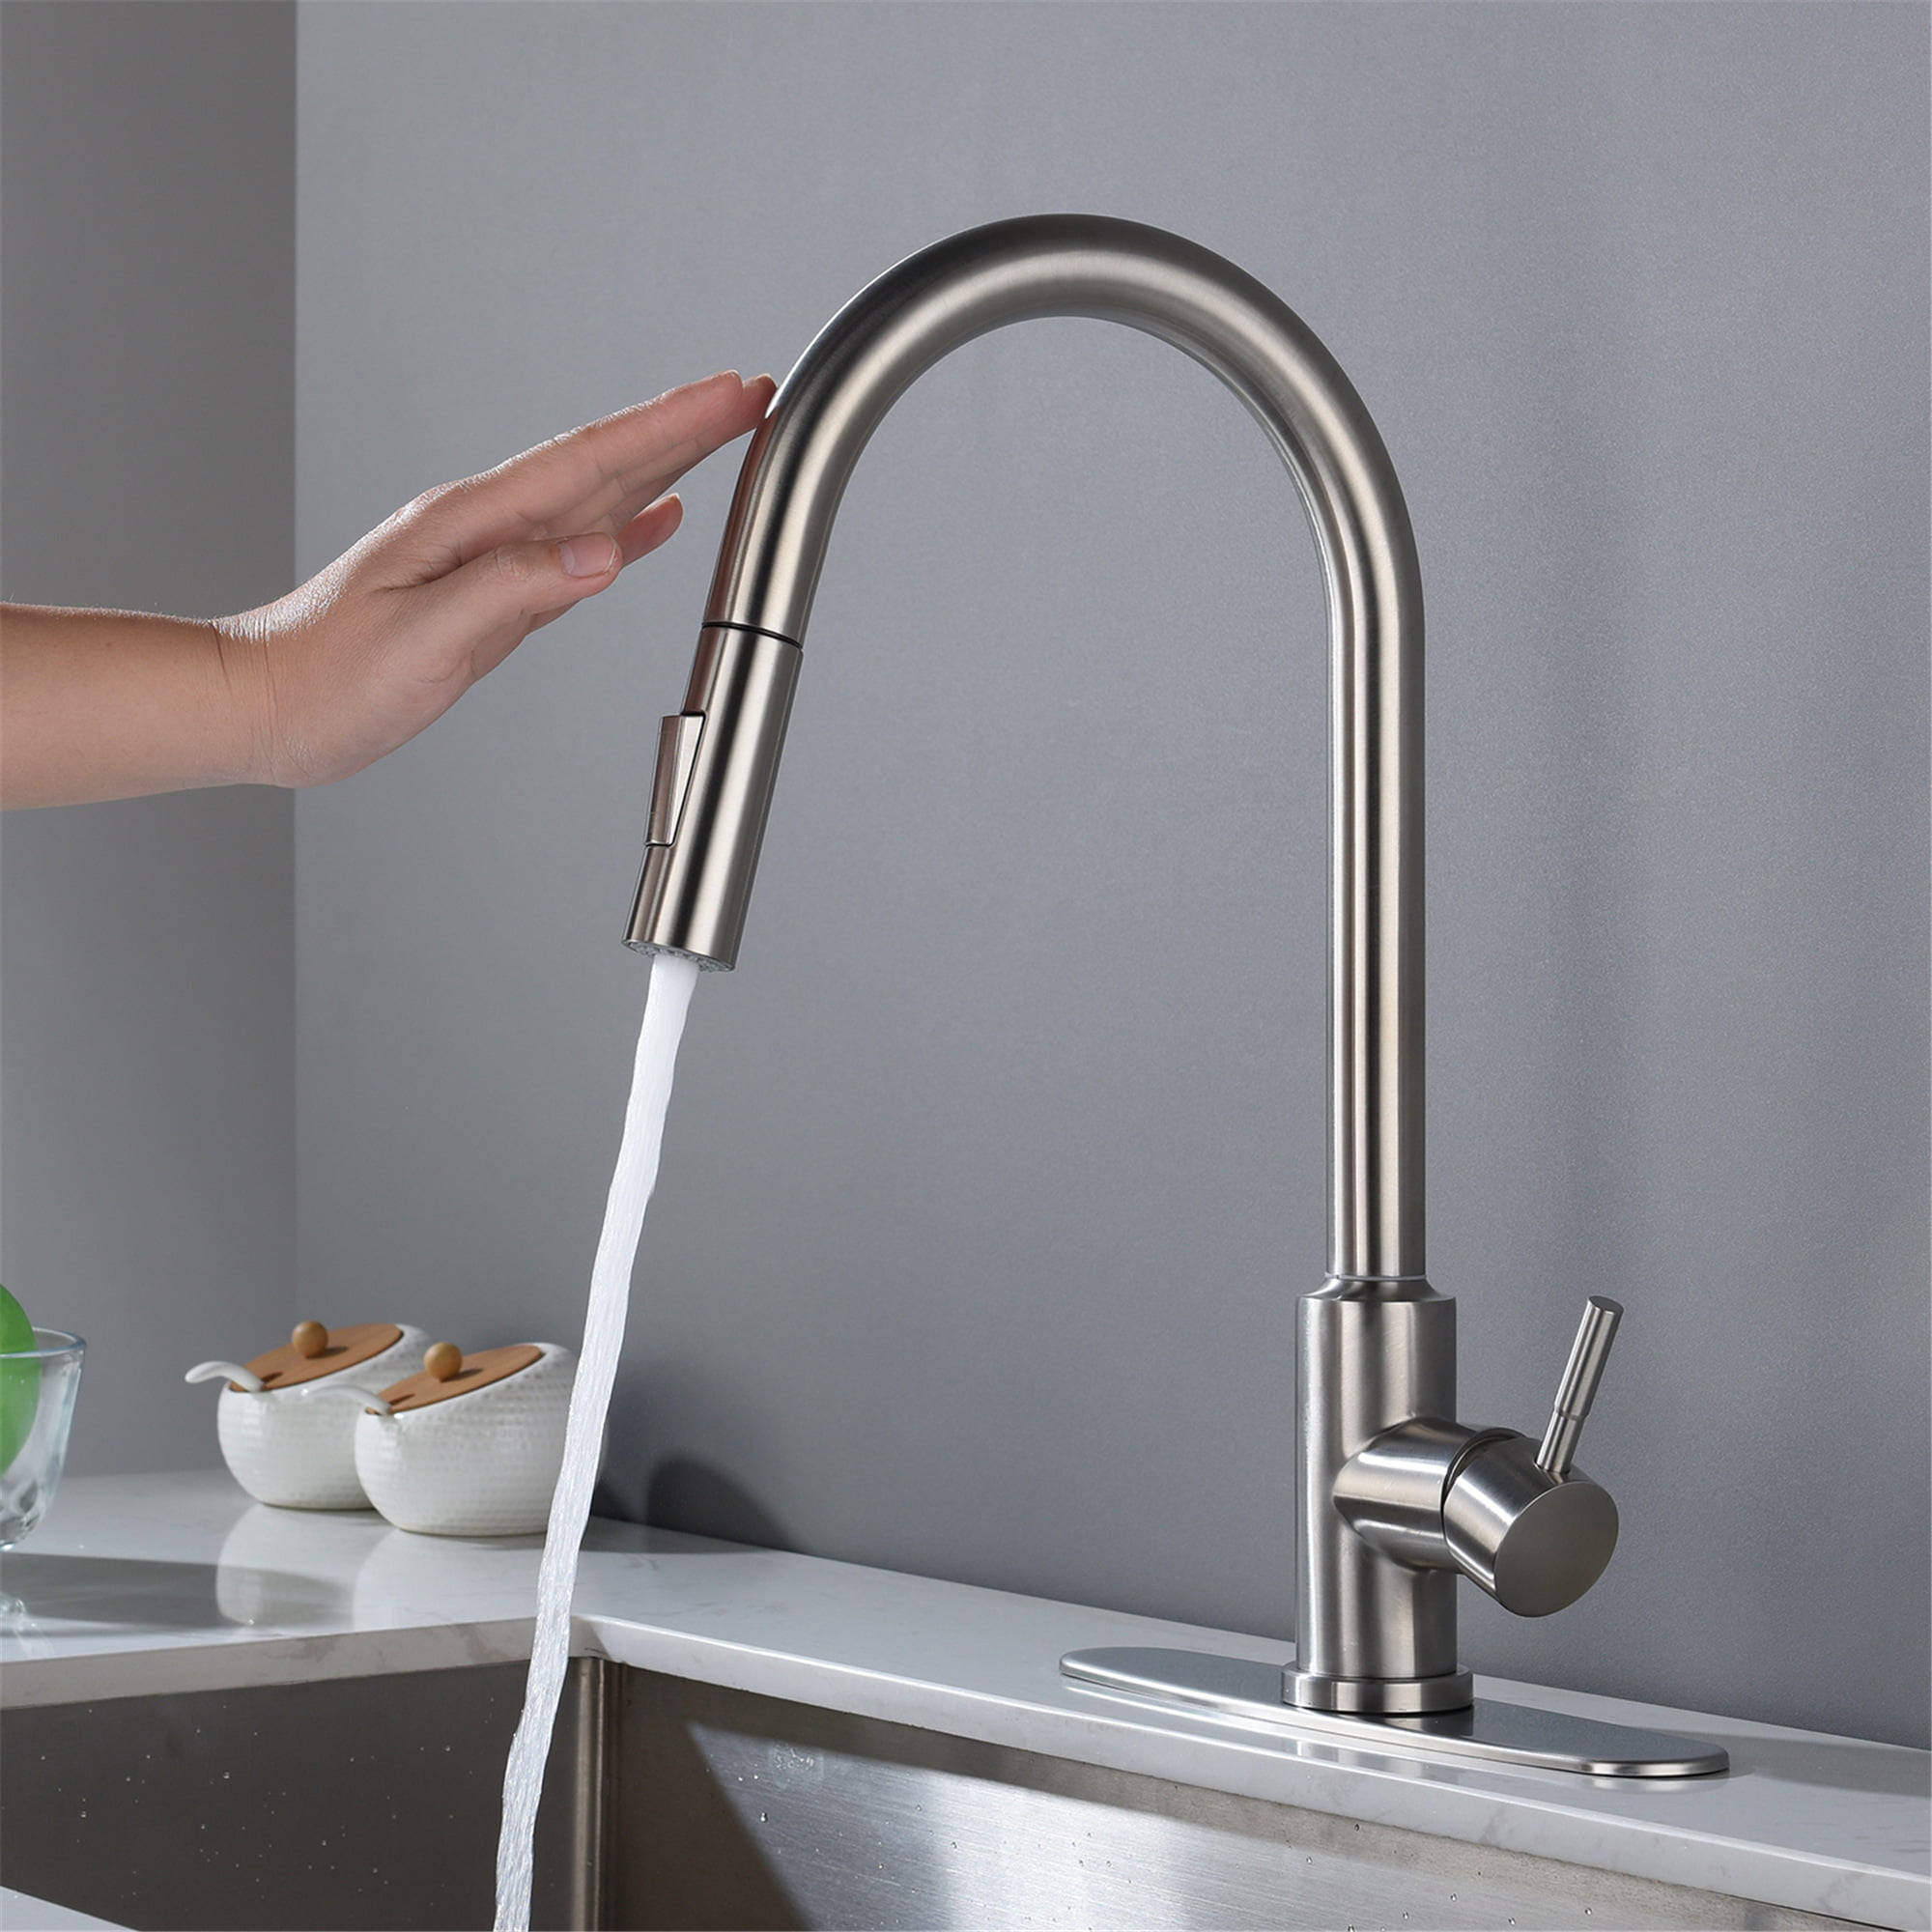 OAKBROOK 4877338 TUCANA Motion Activated Kitchen Faucet Brushed Nickel 